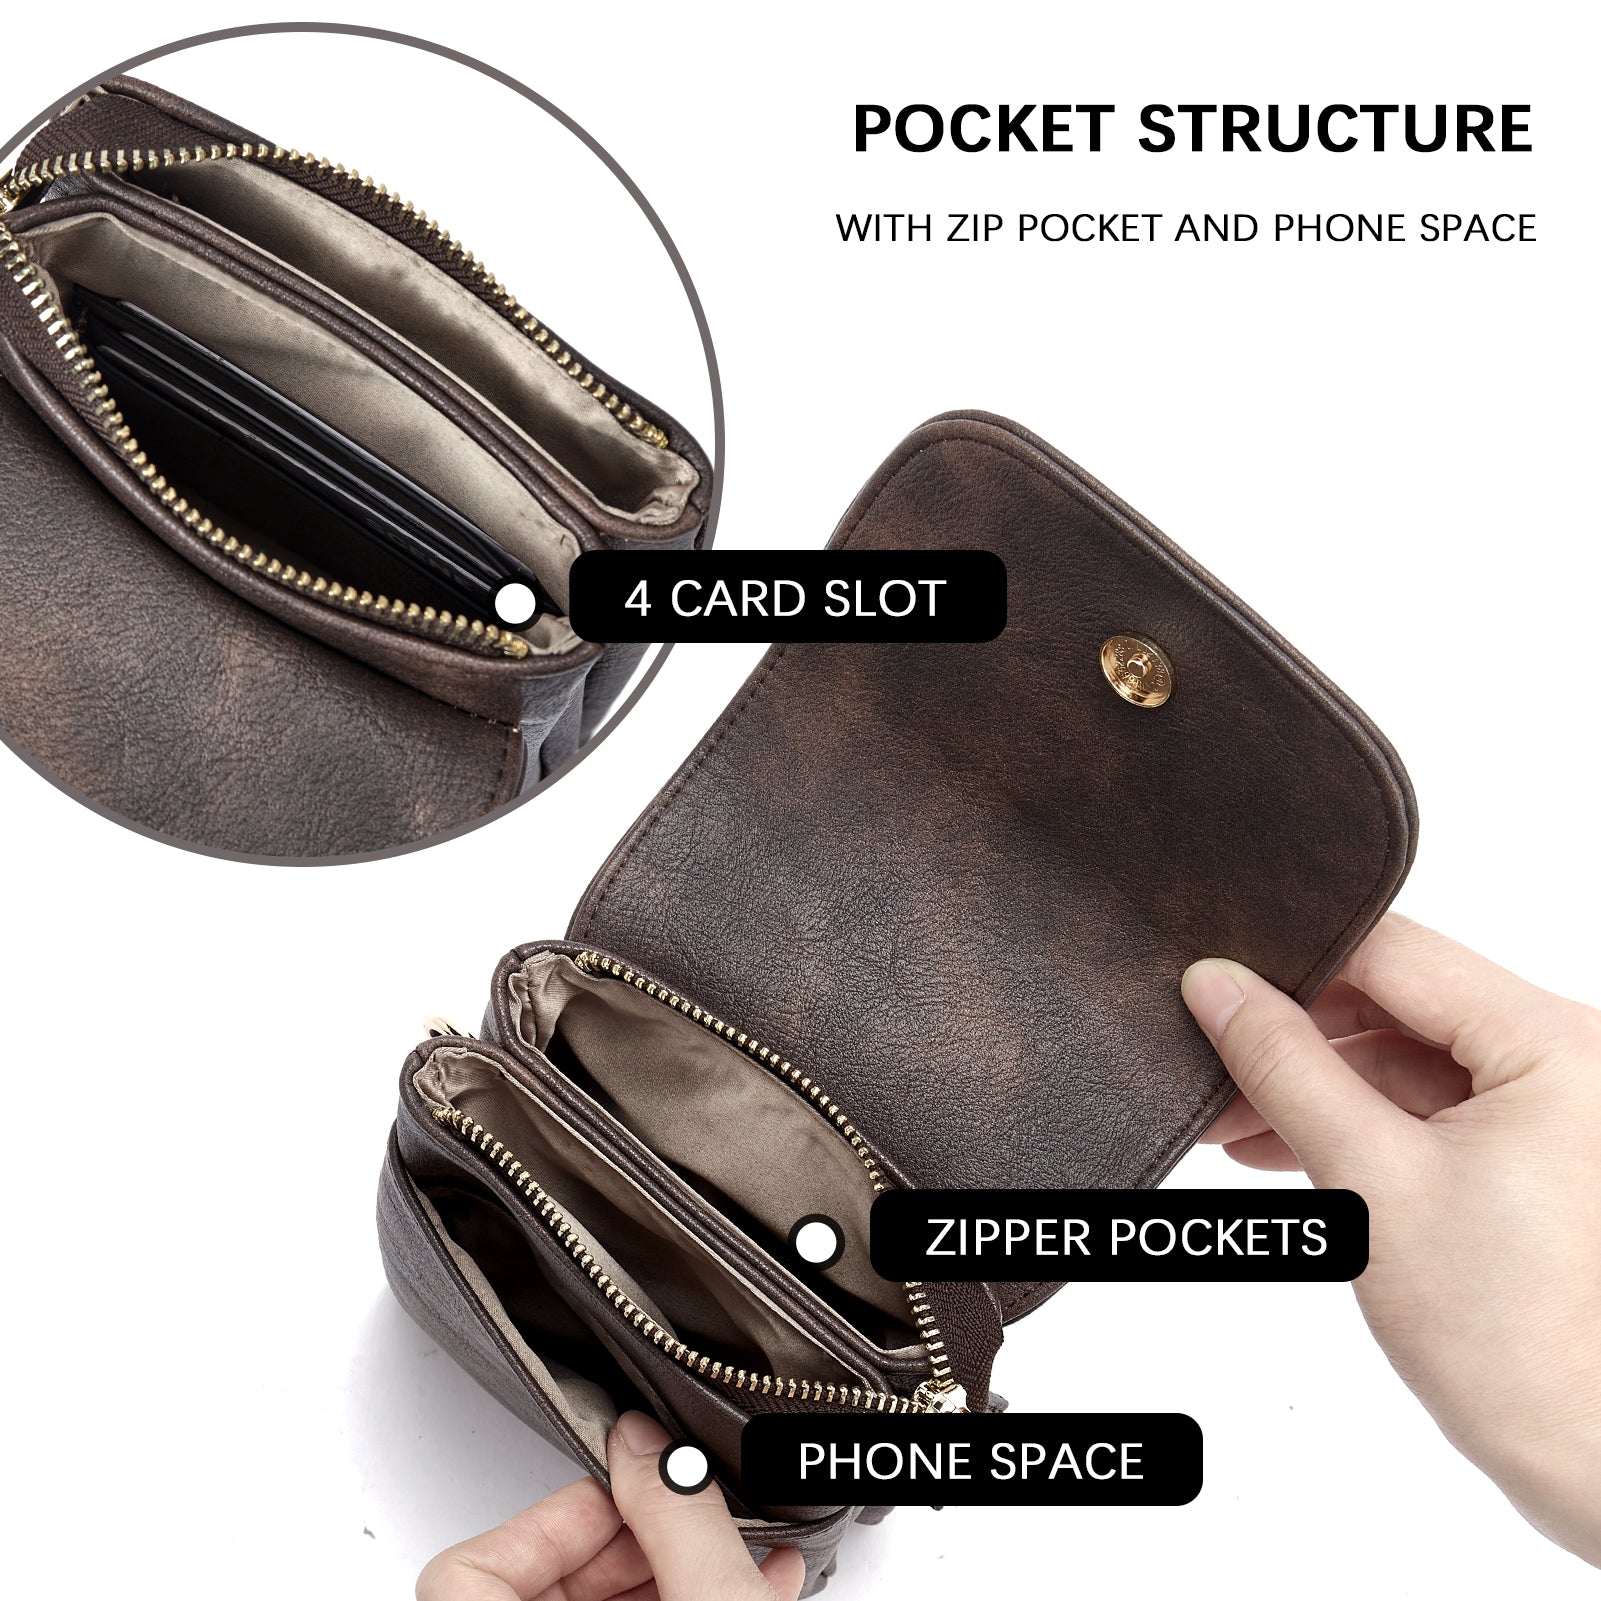 Golden Heart delicate Touch Screen Phone Holder, crossbody sling bag cum  wallet | Available in 3 colors at Rs 199.00 | Single Strap Bag, Picnic  Sling Bag, लंबी पट्टी वाला बैग -